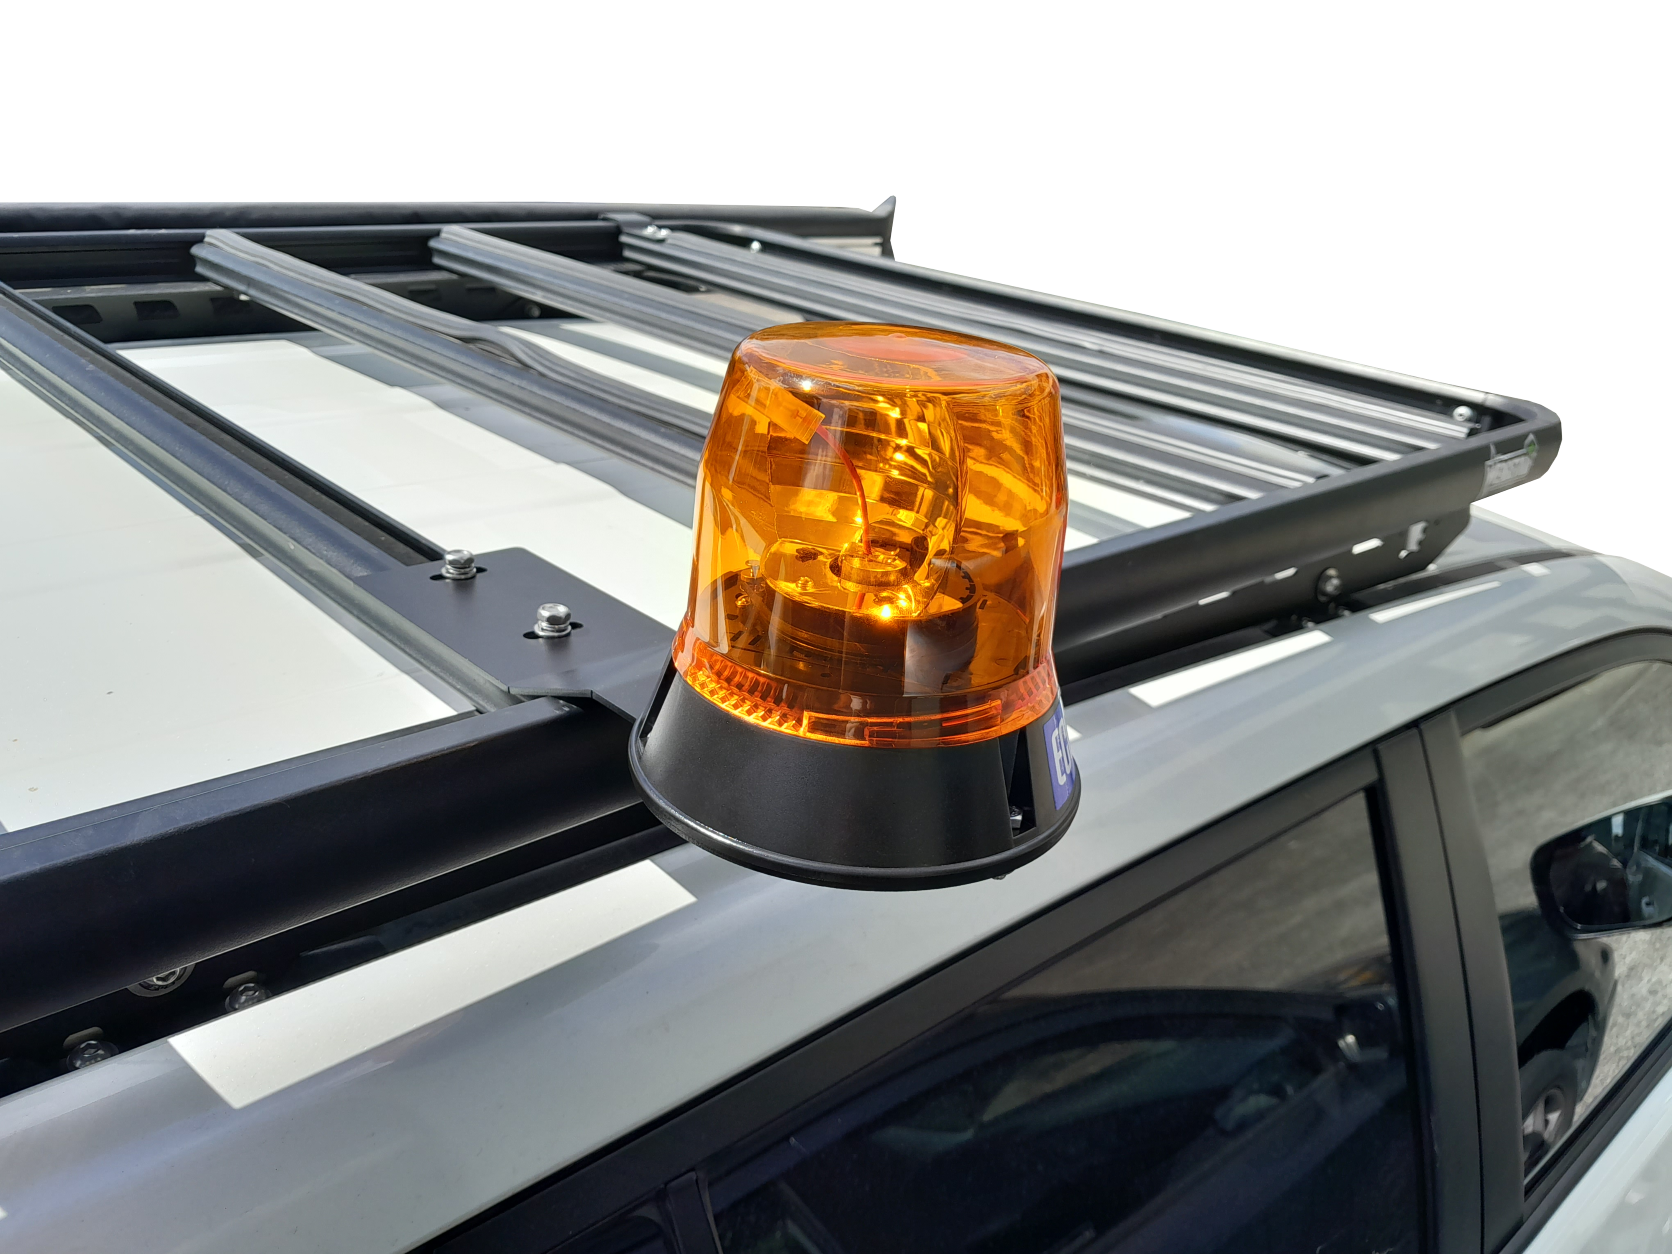 Beacon Mount with Light Attached - Tradesman Roof Racks Australia